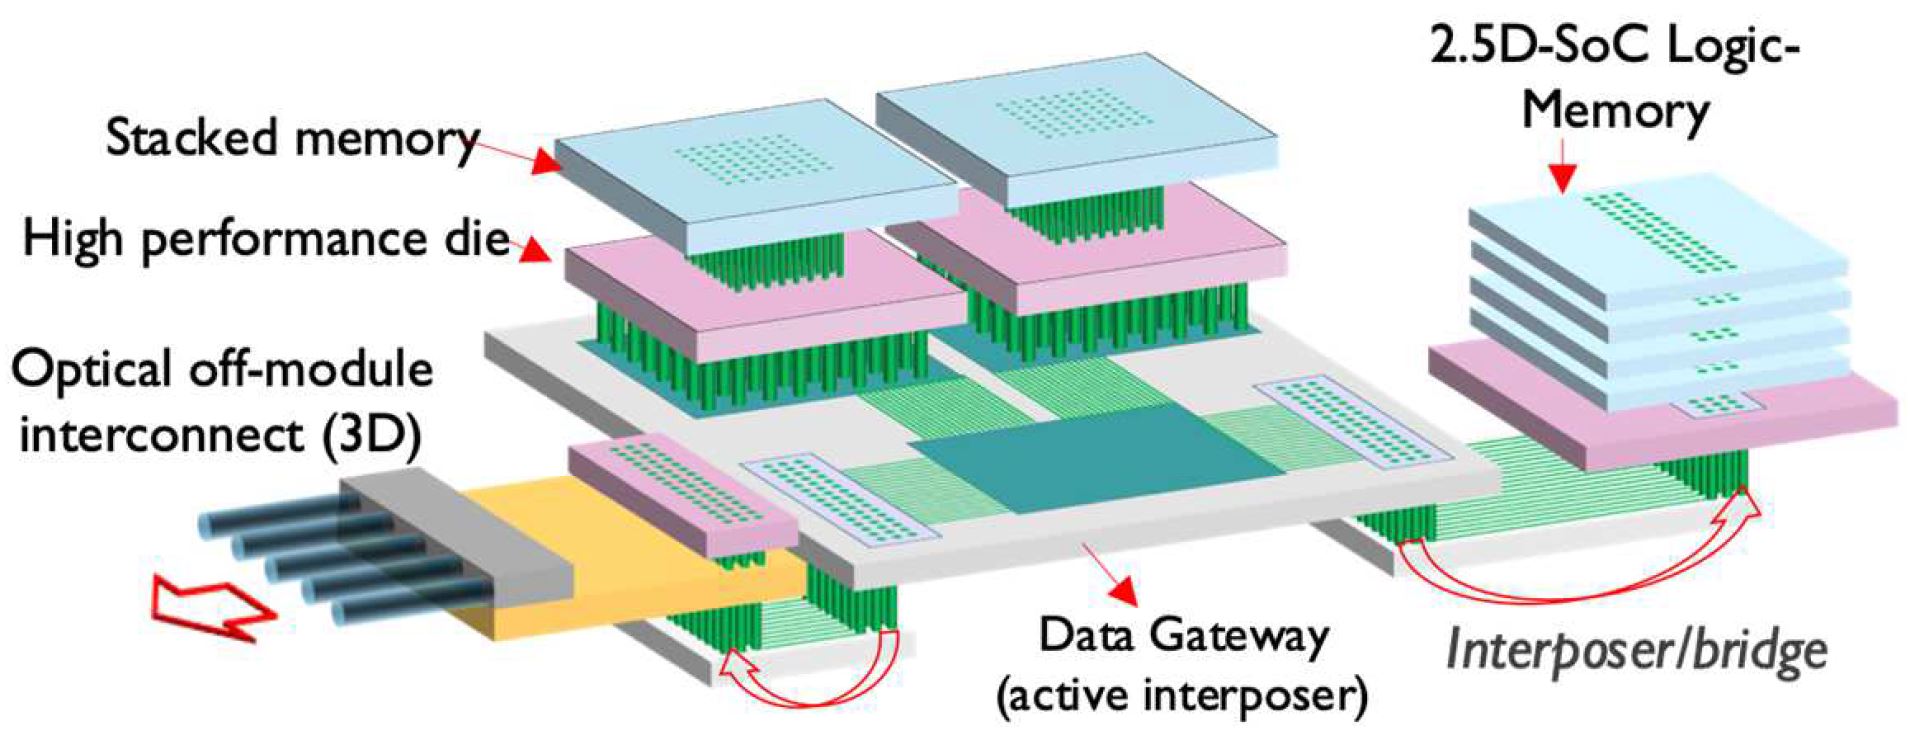 Figure 1: Abstracted view of a possible future high-performance system. High-performance die with 3D-SOC stacked memory are implemented on an active interposer chip which acts as a data gateway and connects in a ‘2.5’ fashion with local high bandwidth memories and optical transceiver modules (as presented at 2021 IEDM). 